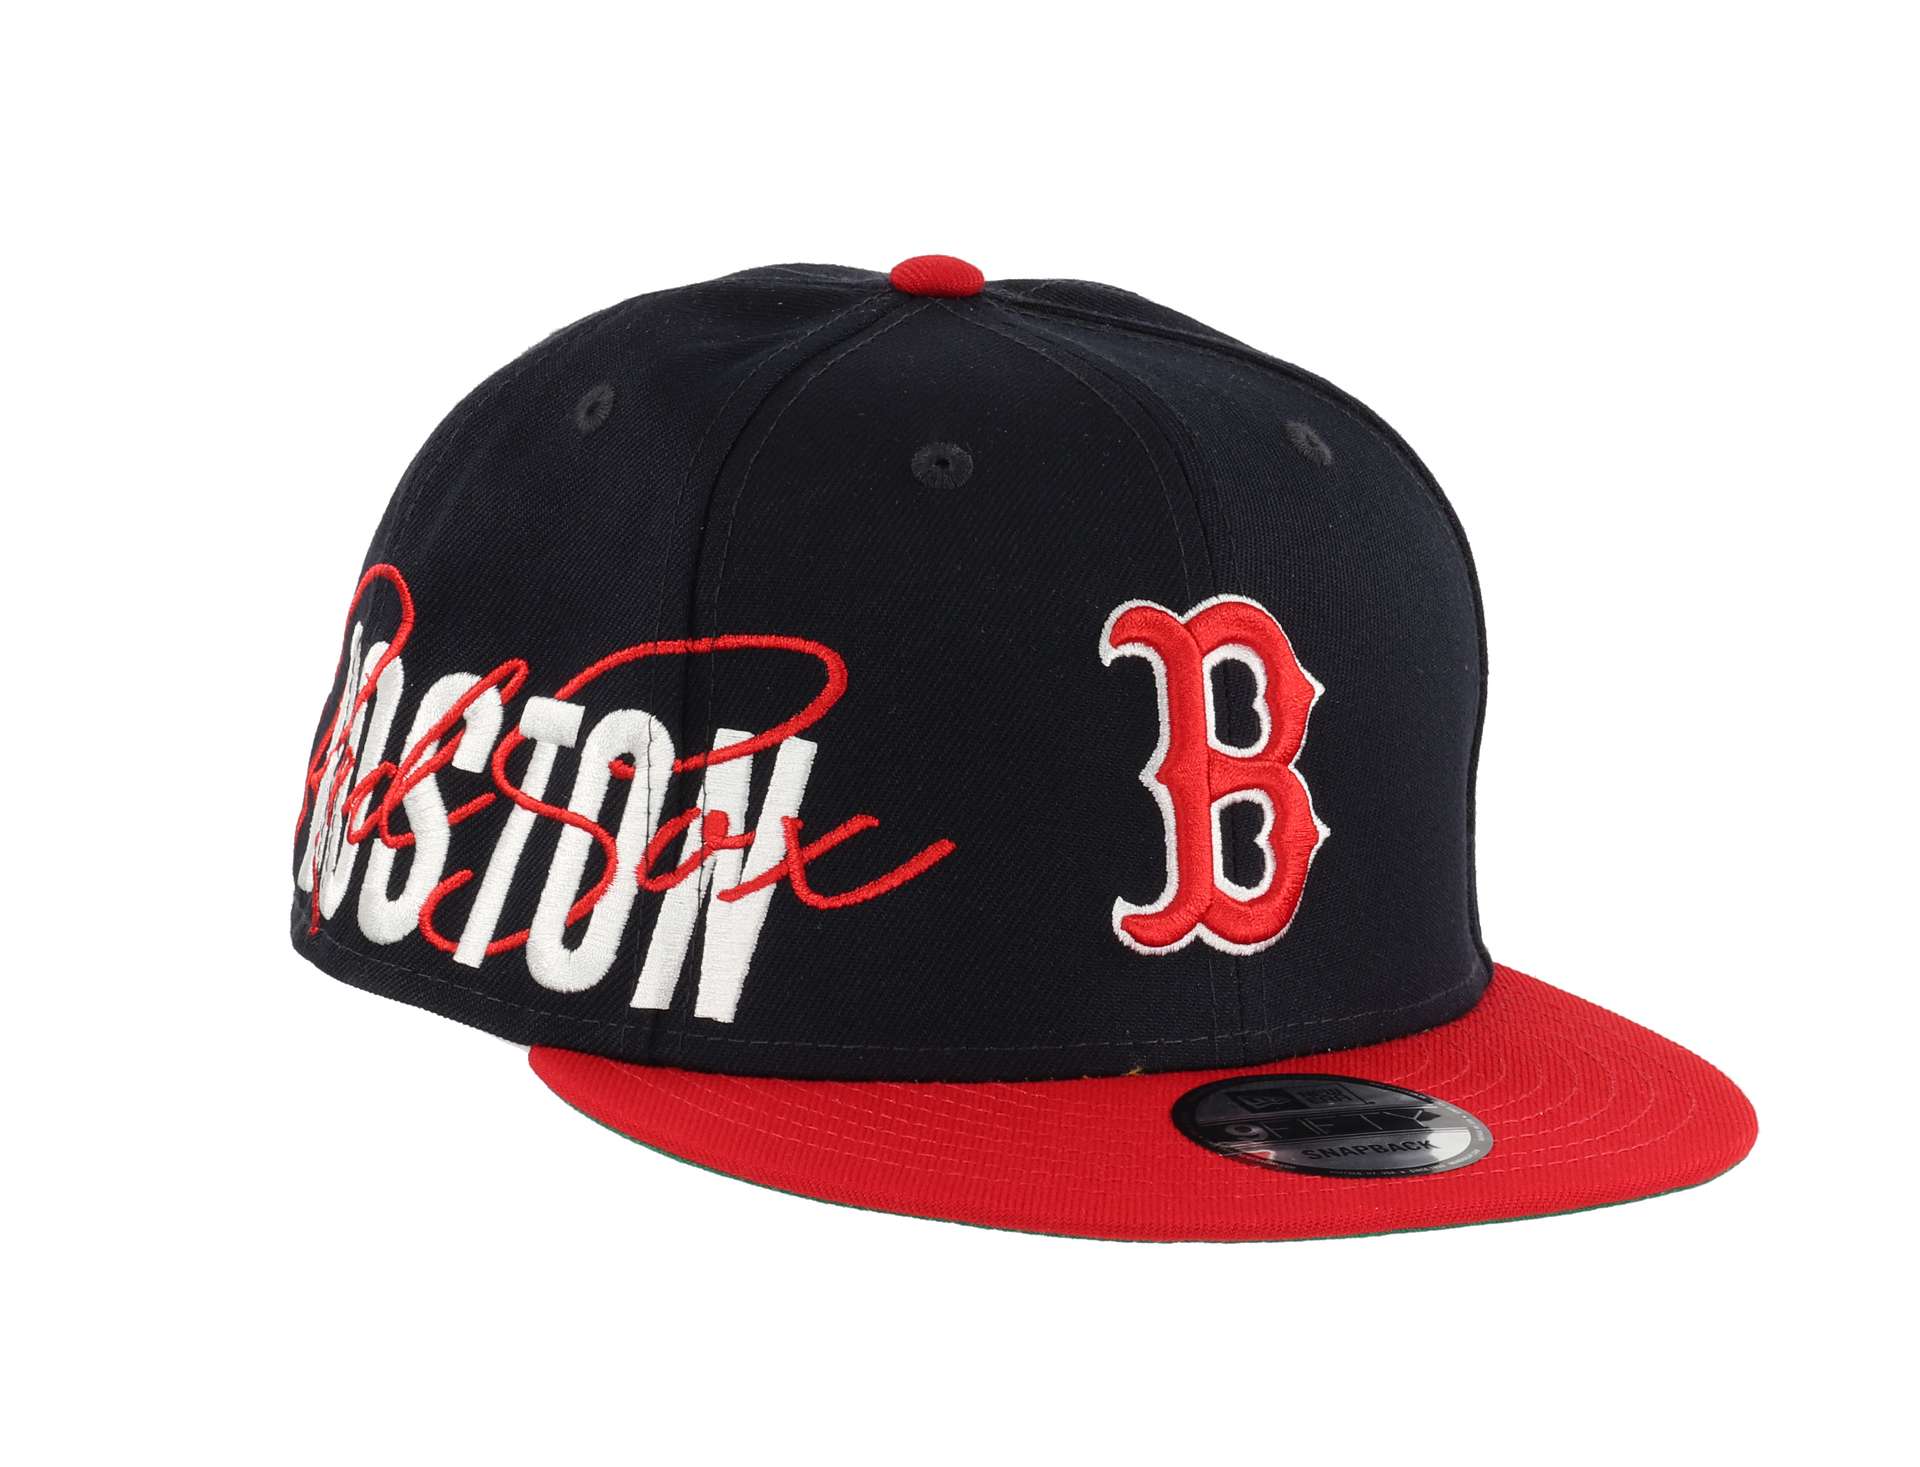 Boston Red Sox Sidefont Navy / Red 9Fifty Snapback Cap New Era